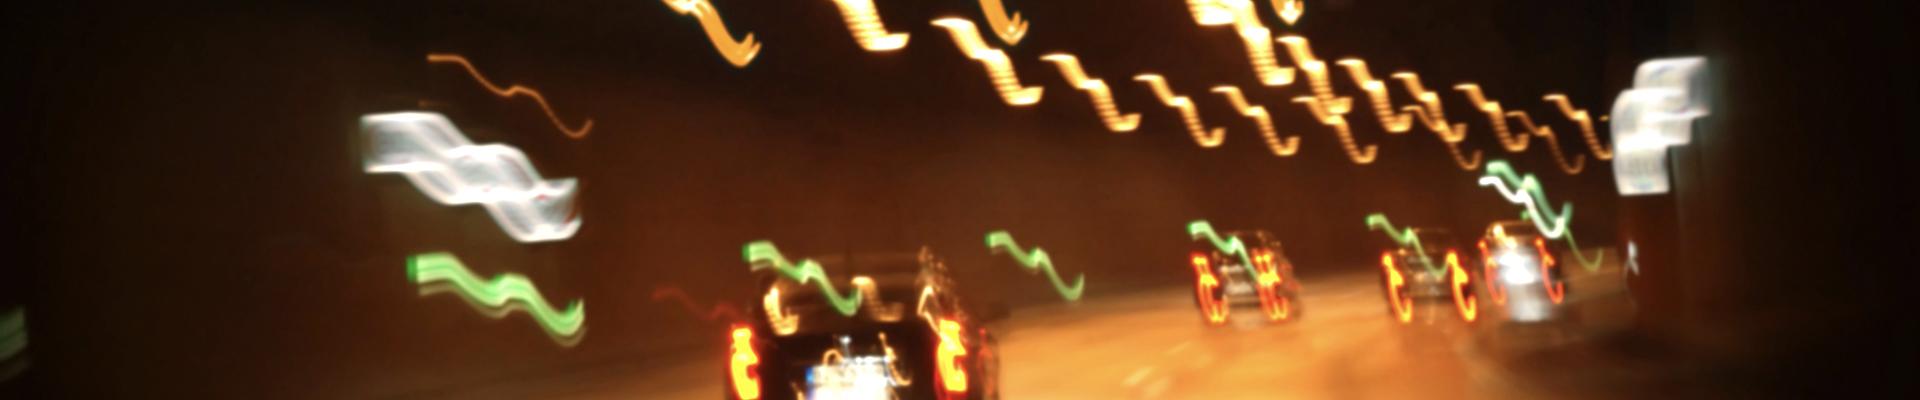 blurred photo of cars driving at night